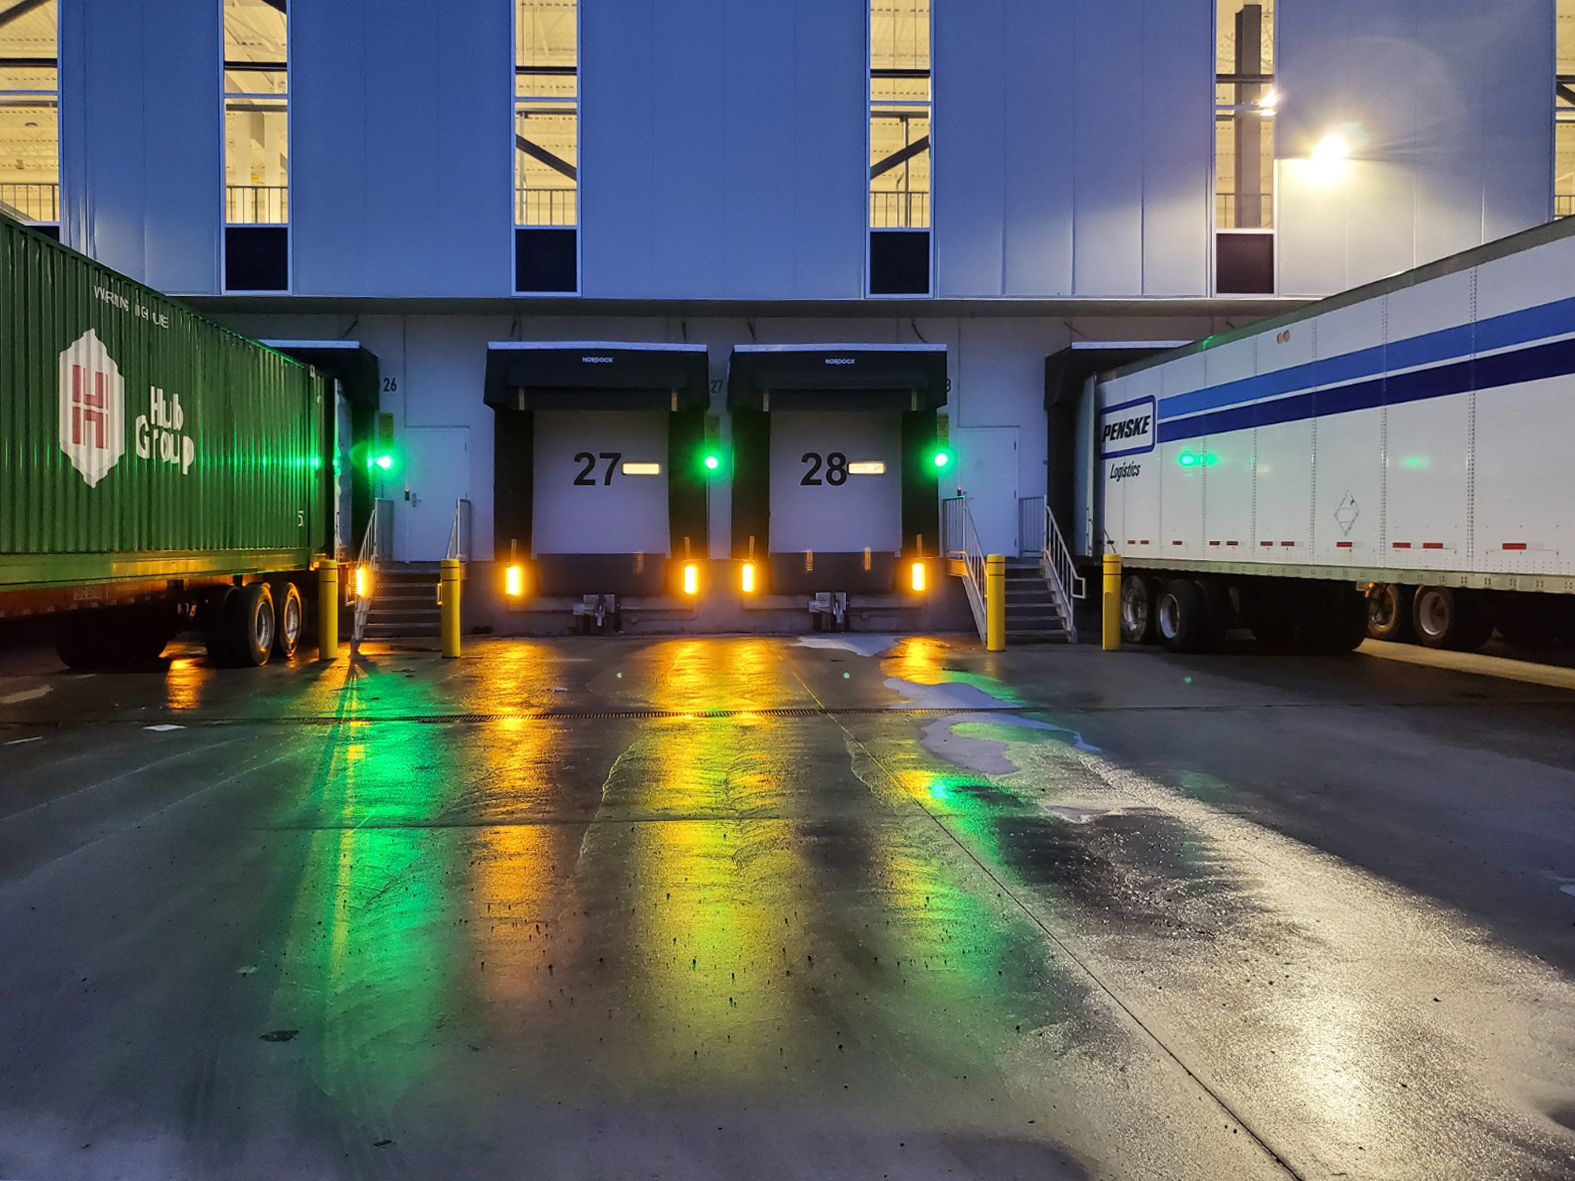 Superguide light shipping receiving dock area night time